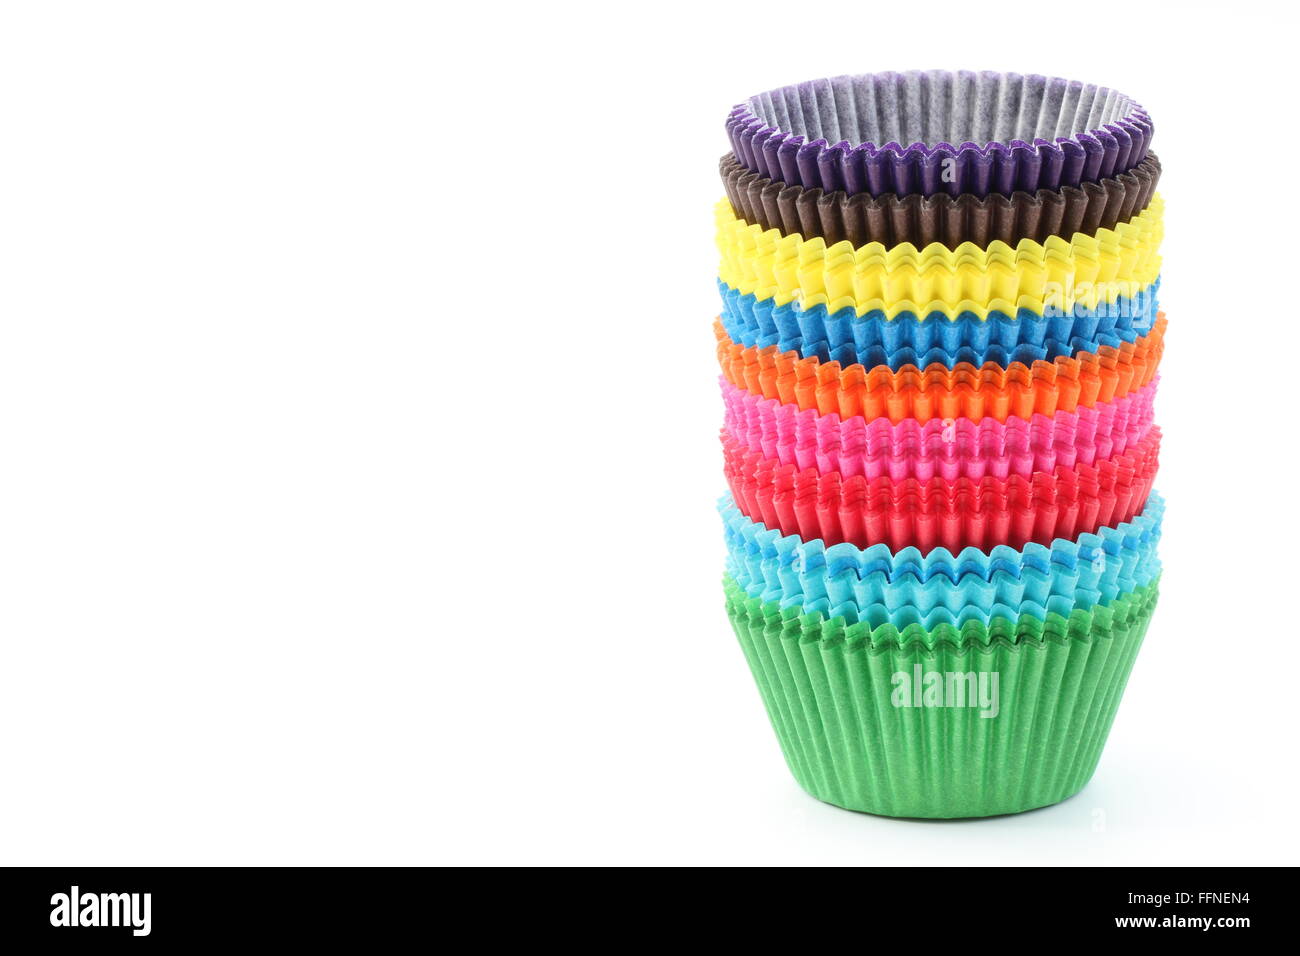 A stack of colorful baking cases on an isolated white background. Stock Photo